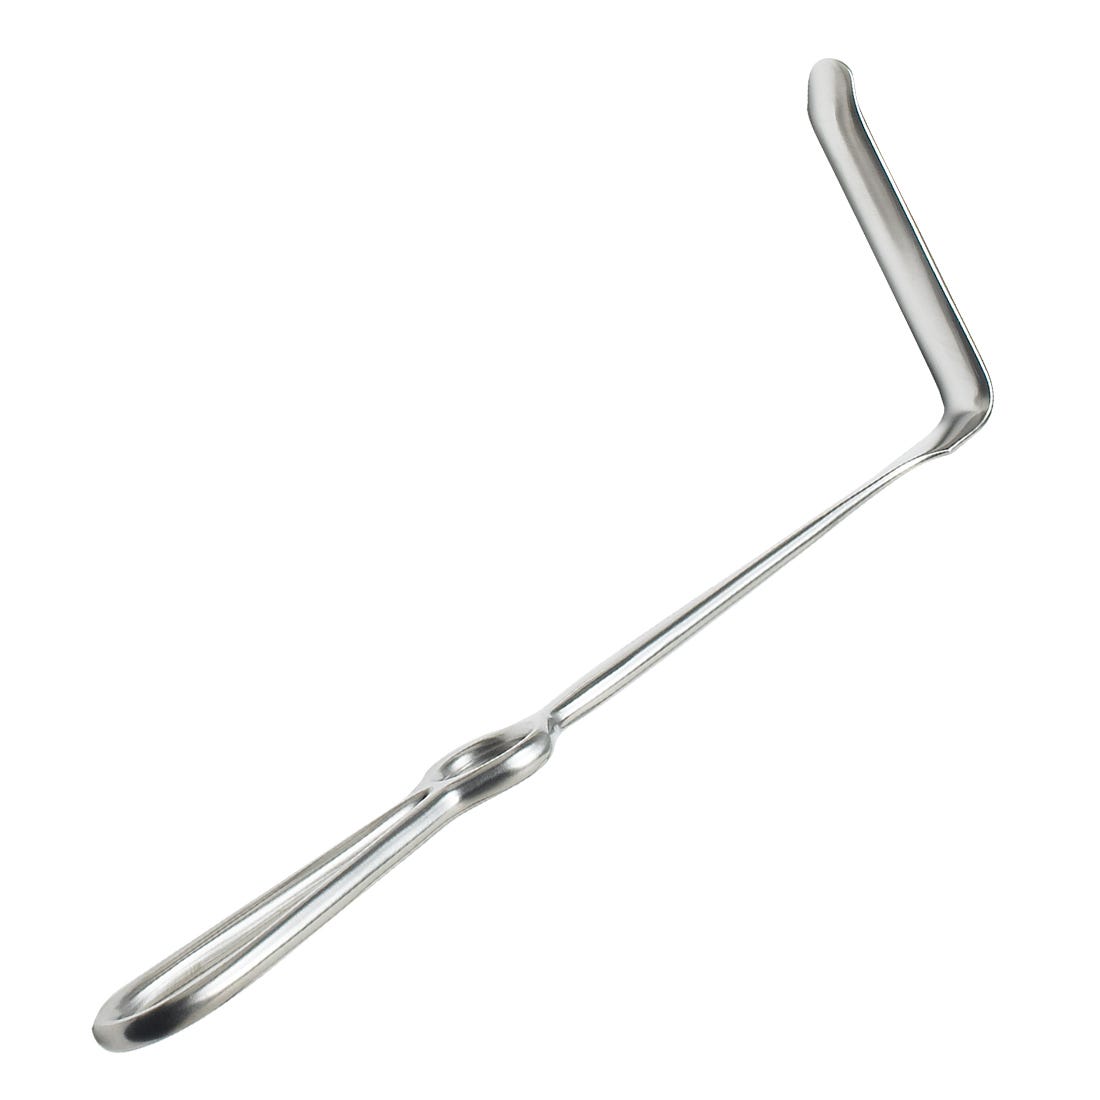 Obwegeser Type Surgical Retractor Concave, Curved Up, 14mm x 70mm